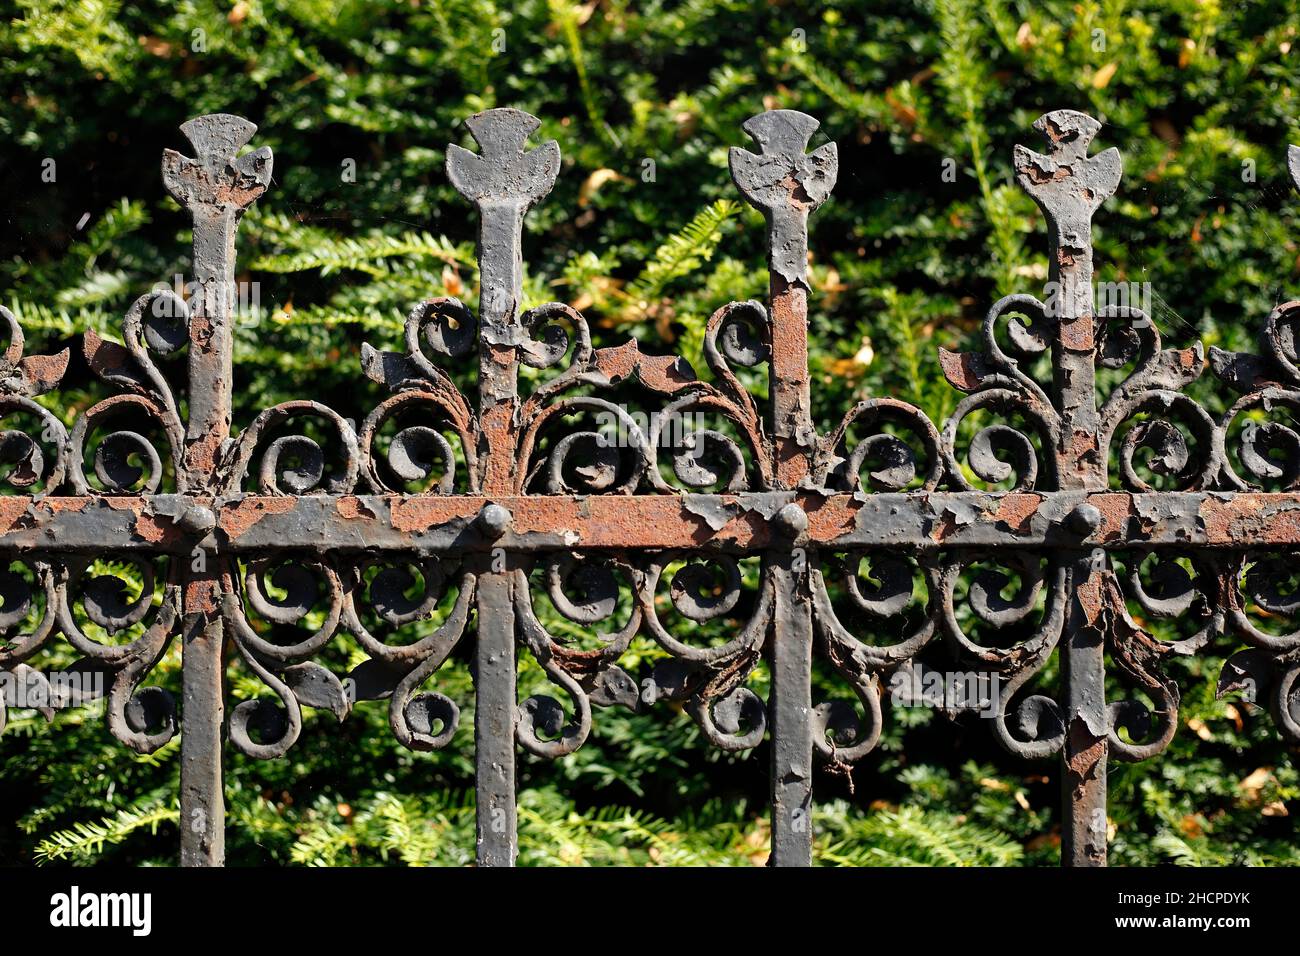 Alter Zaun High Resolution Stock Photography and Images - Alamy